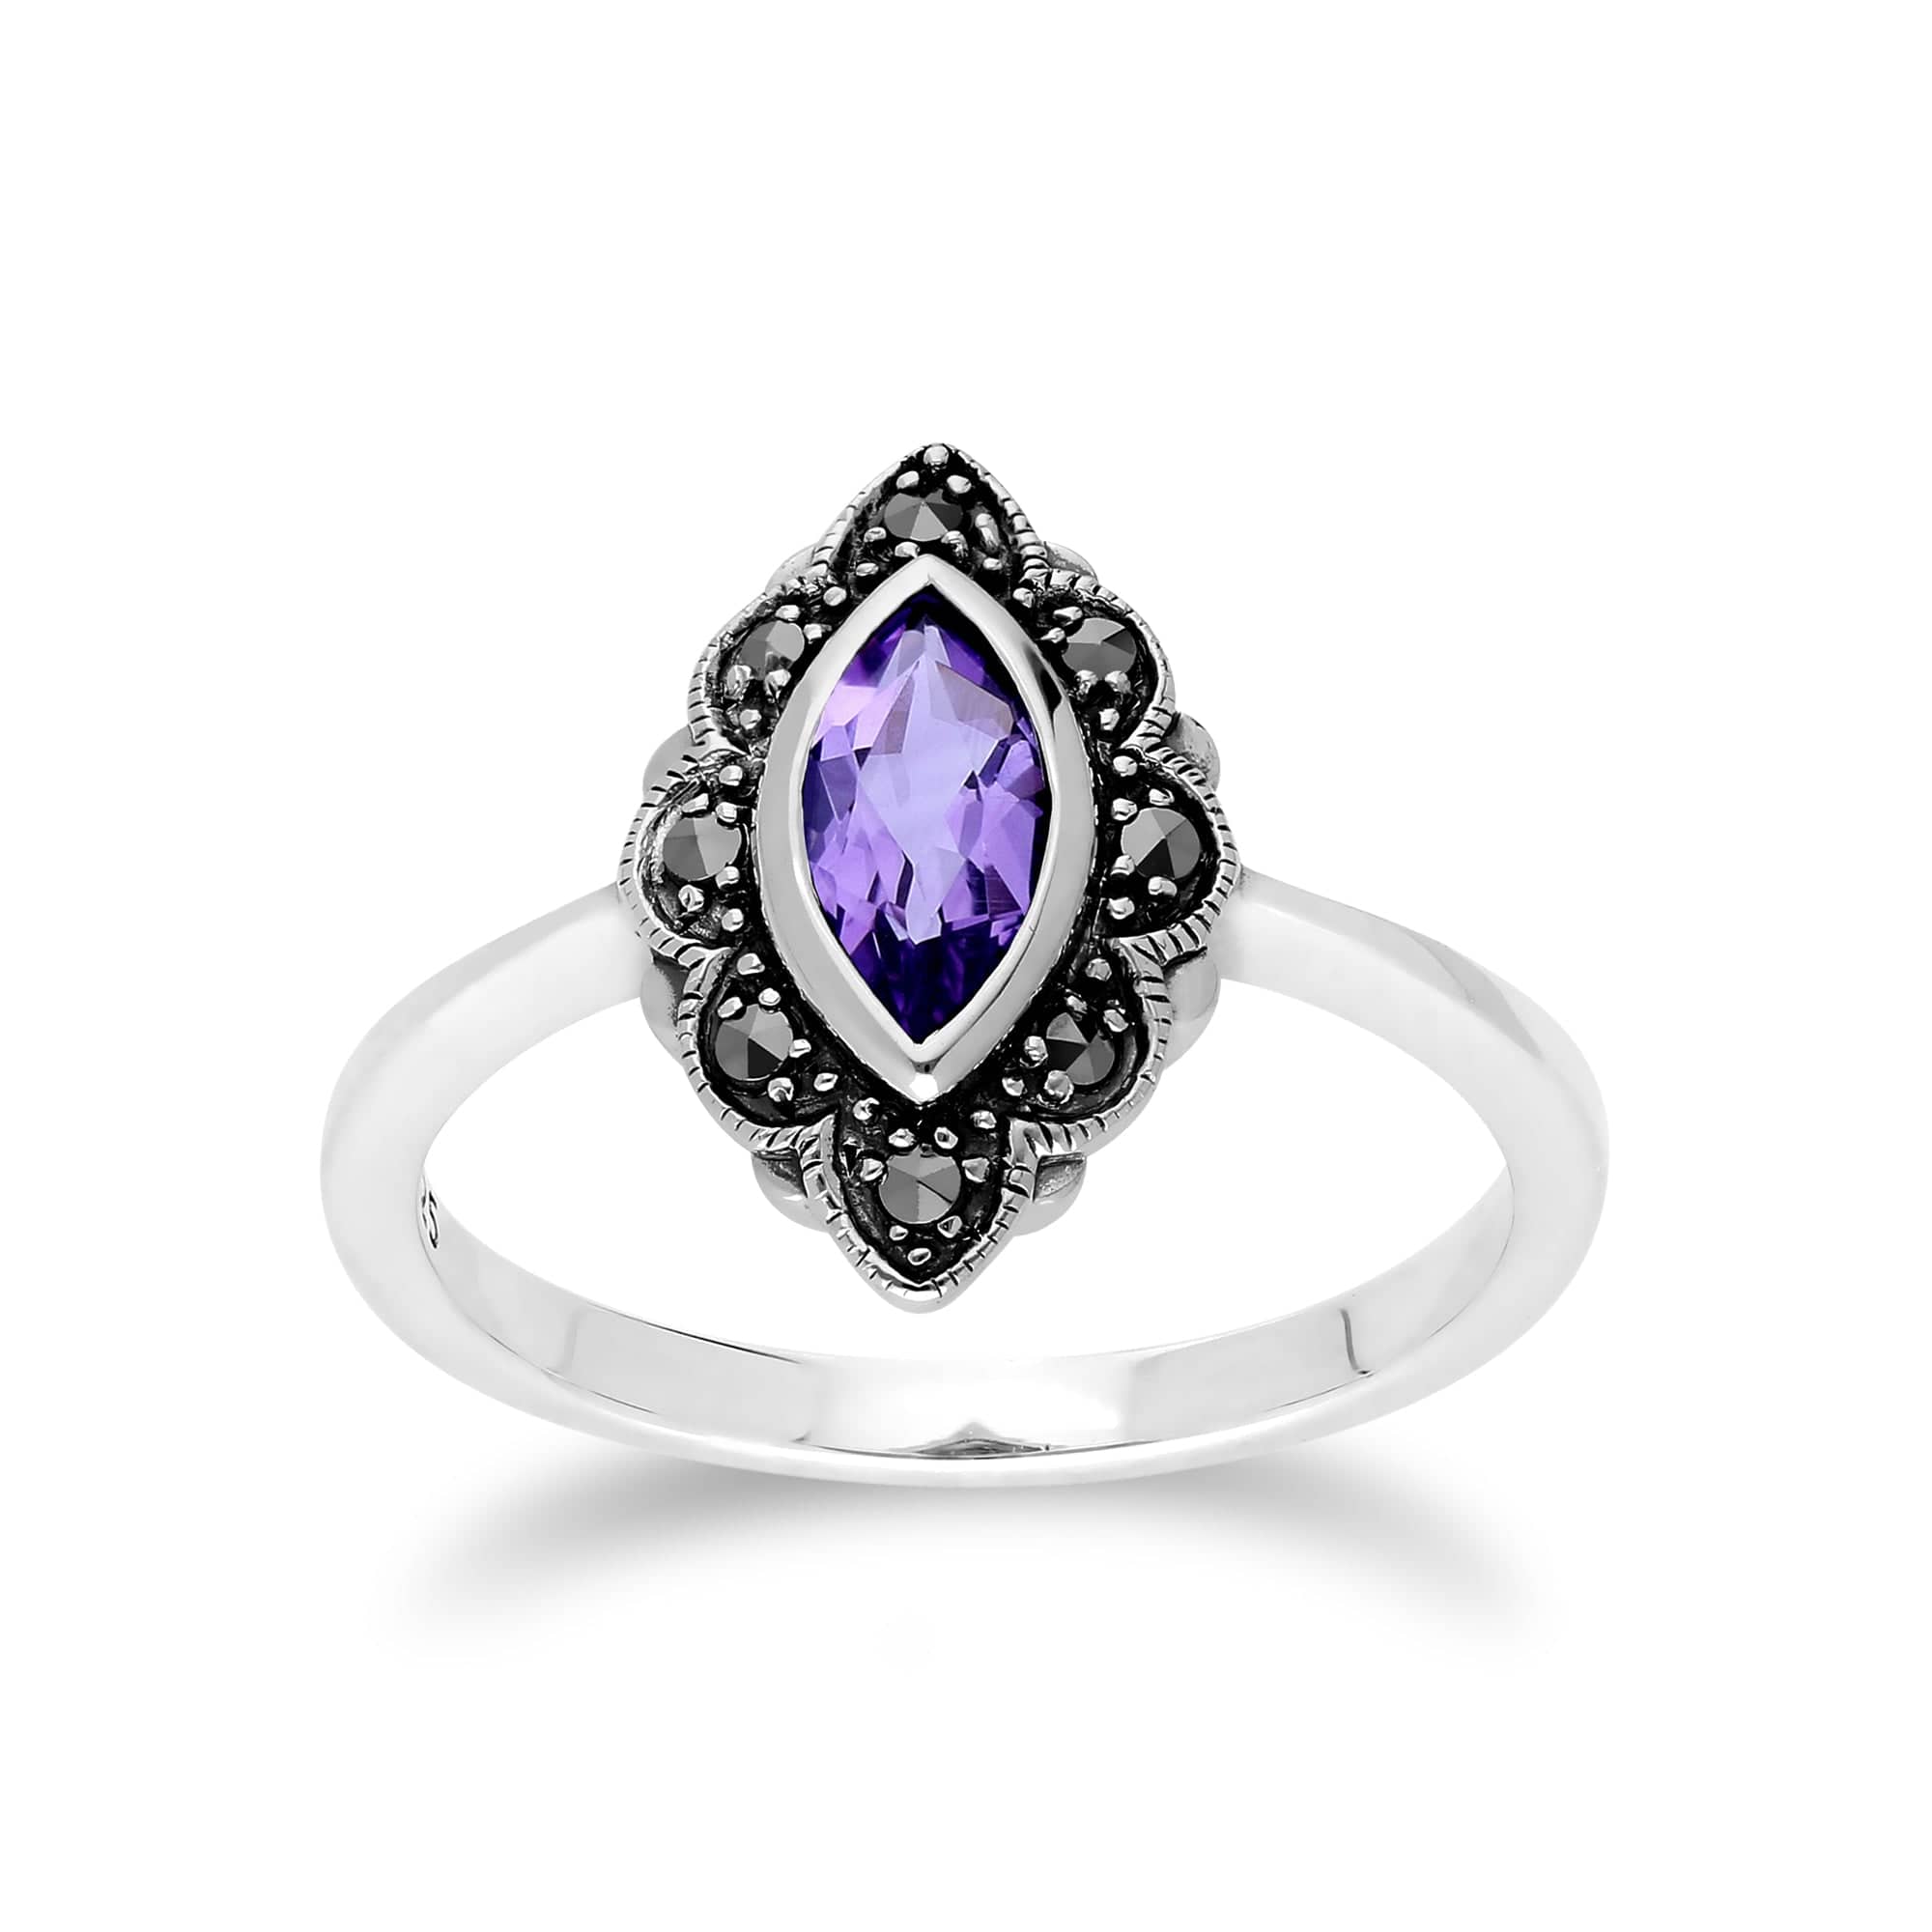 214R597201925 Art Nouveau Marquise Amethyst & Marcasite Leaf Ring in 925 Sterling Silver 1